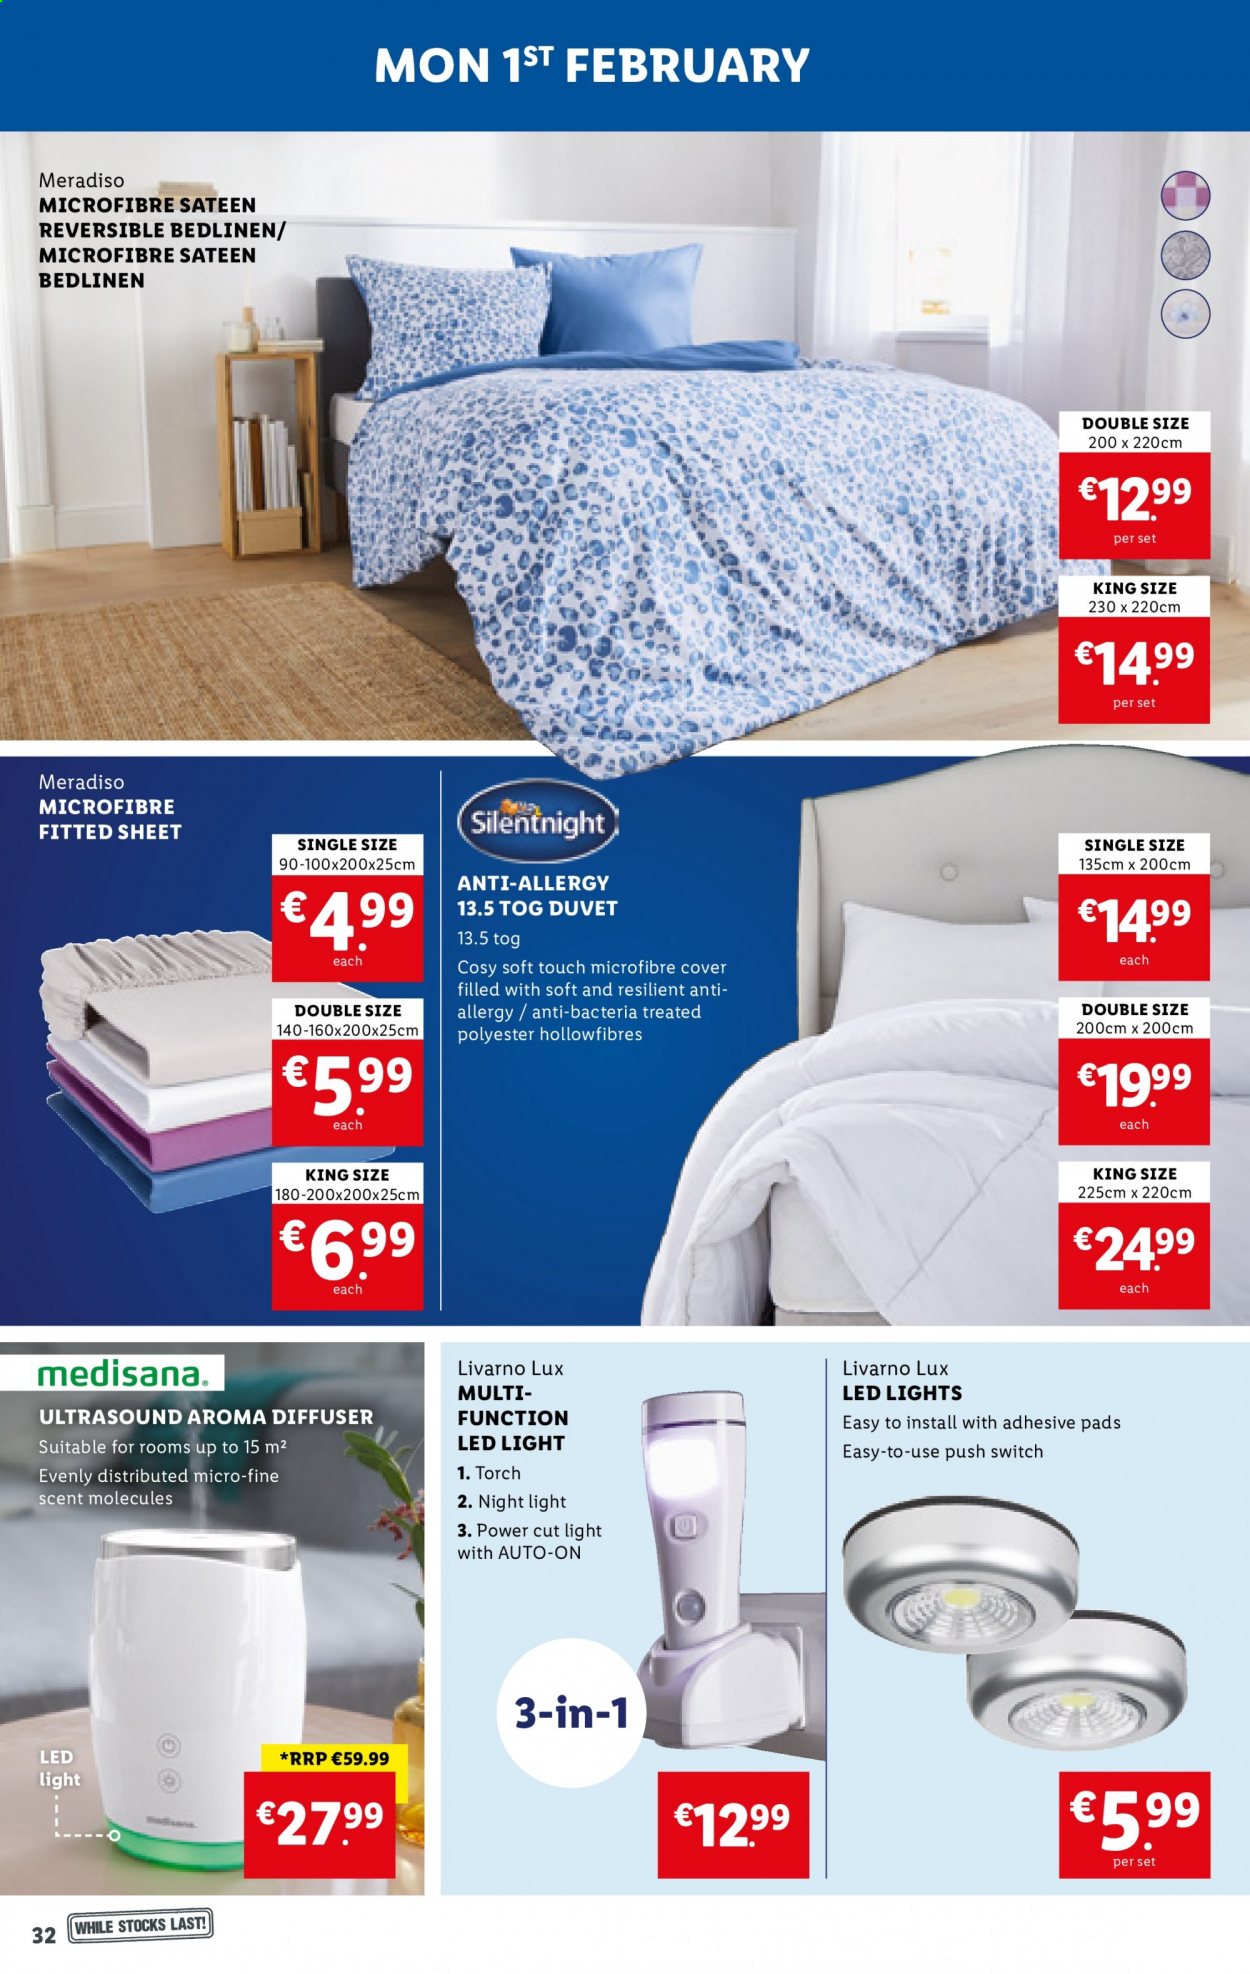 thumbnail - Lidl offer  - 28.01.2021 - 03.02.2021 - Sales products - Lux, diffuser, duvet, microfibre cover, satin sheets, LED light, switch. Page 32.